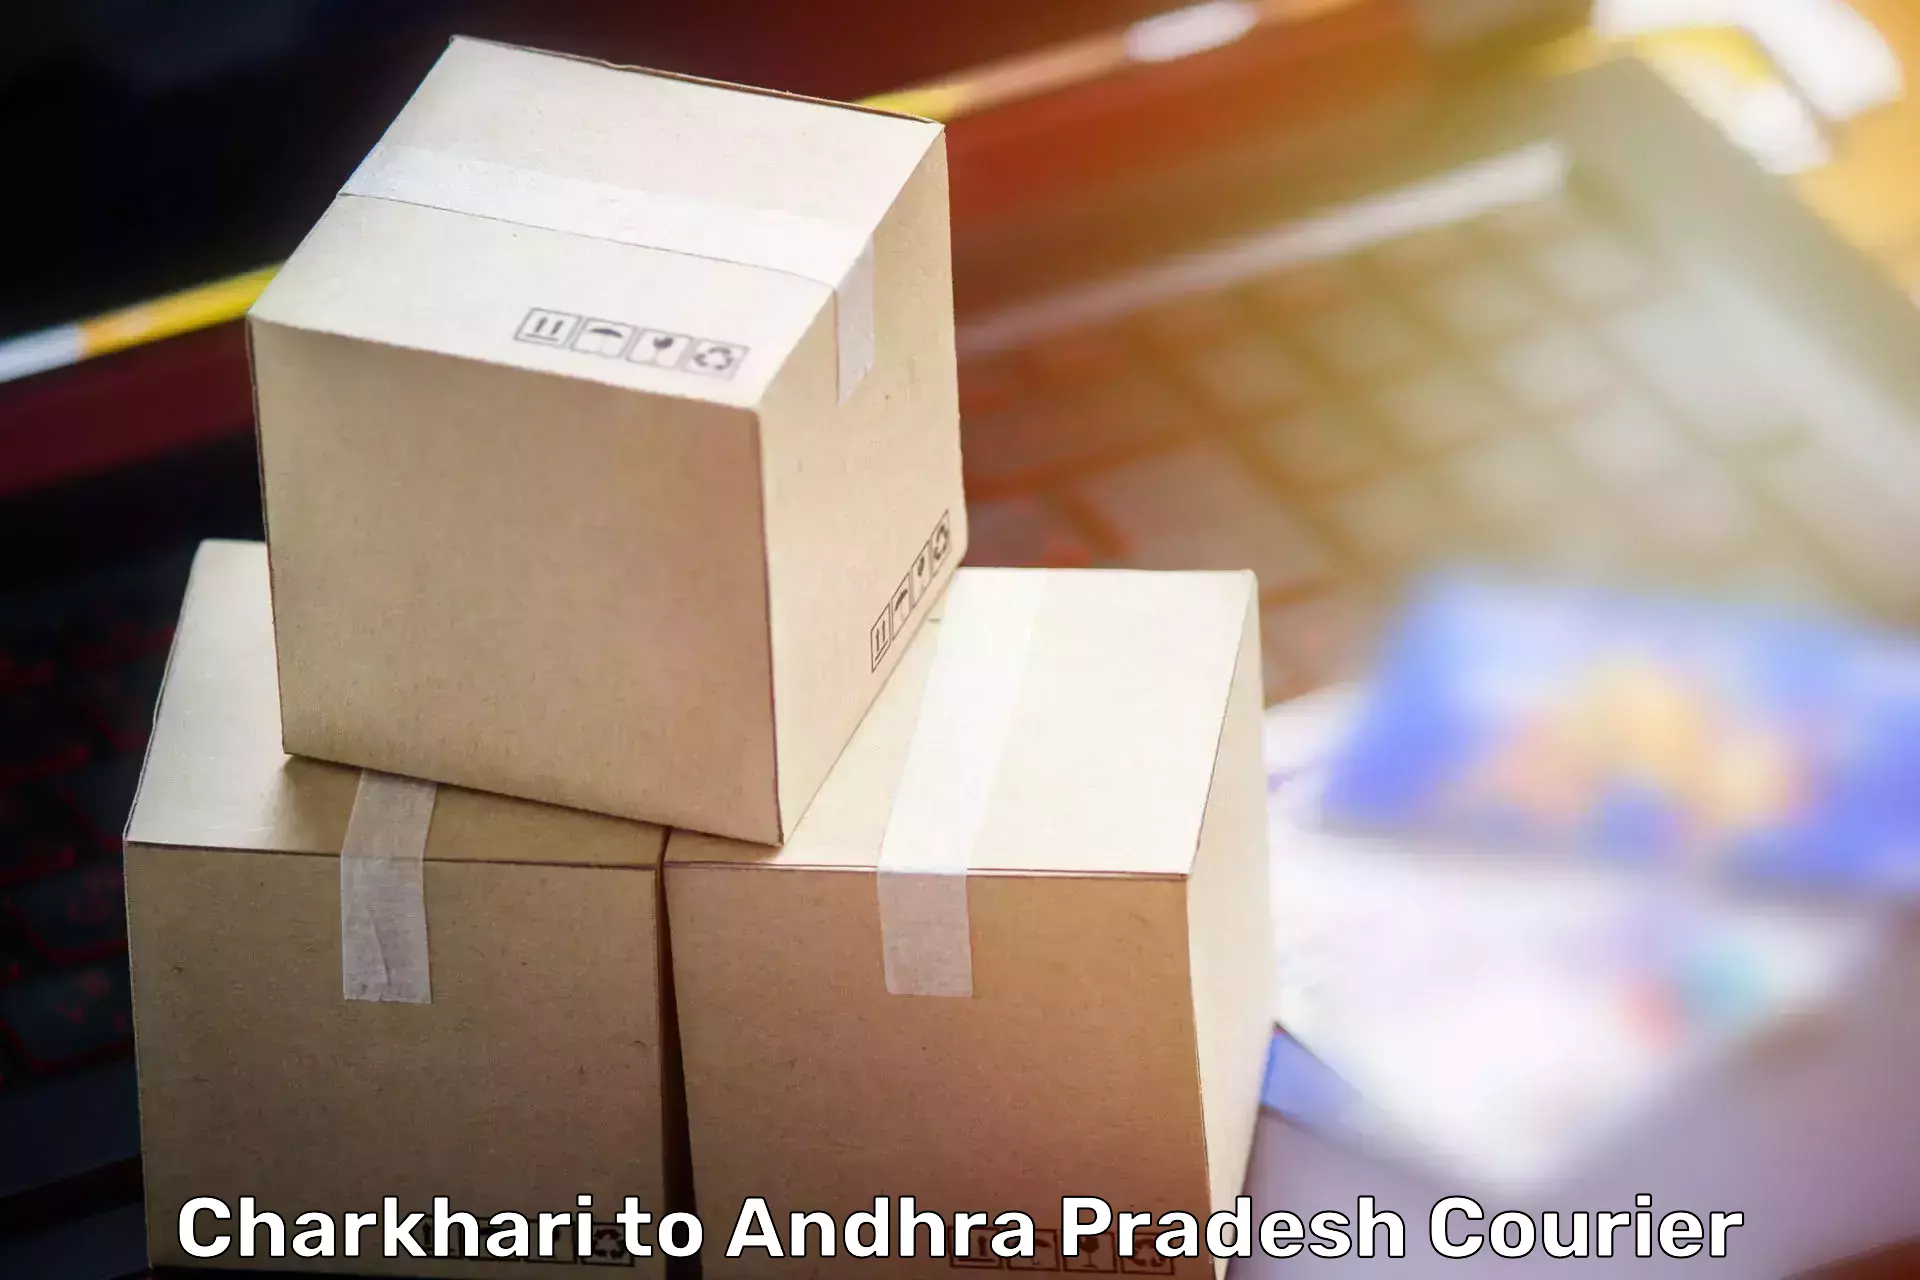 Furniture moving specialists Charkhari to Andhra Pradesh